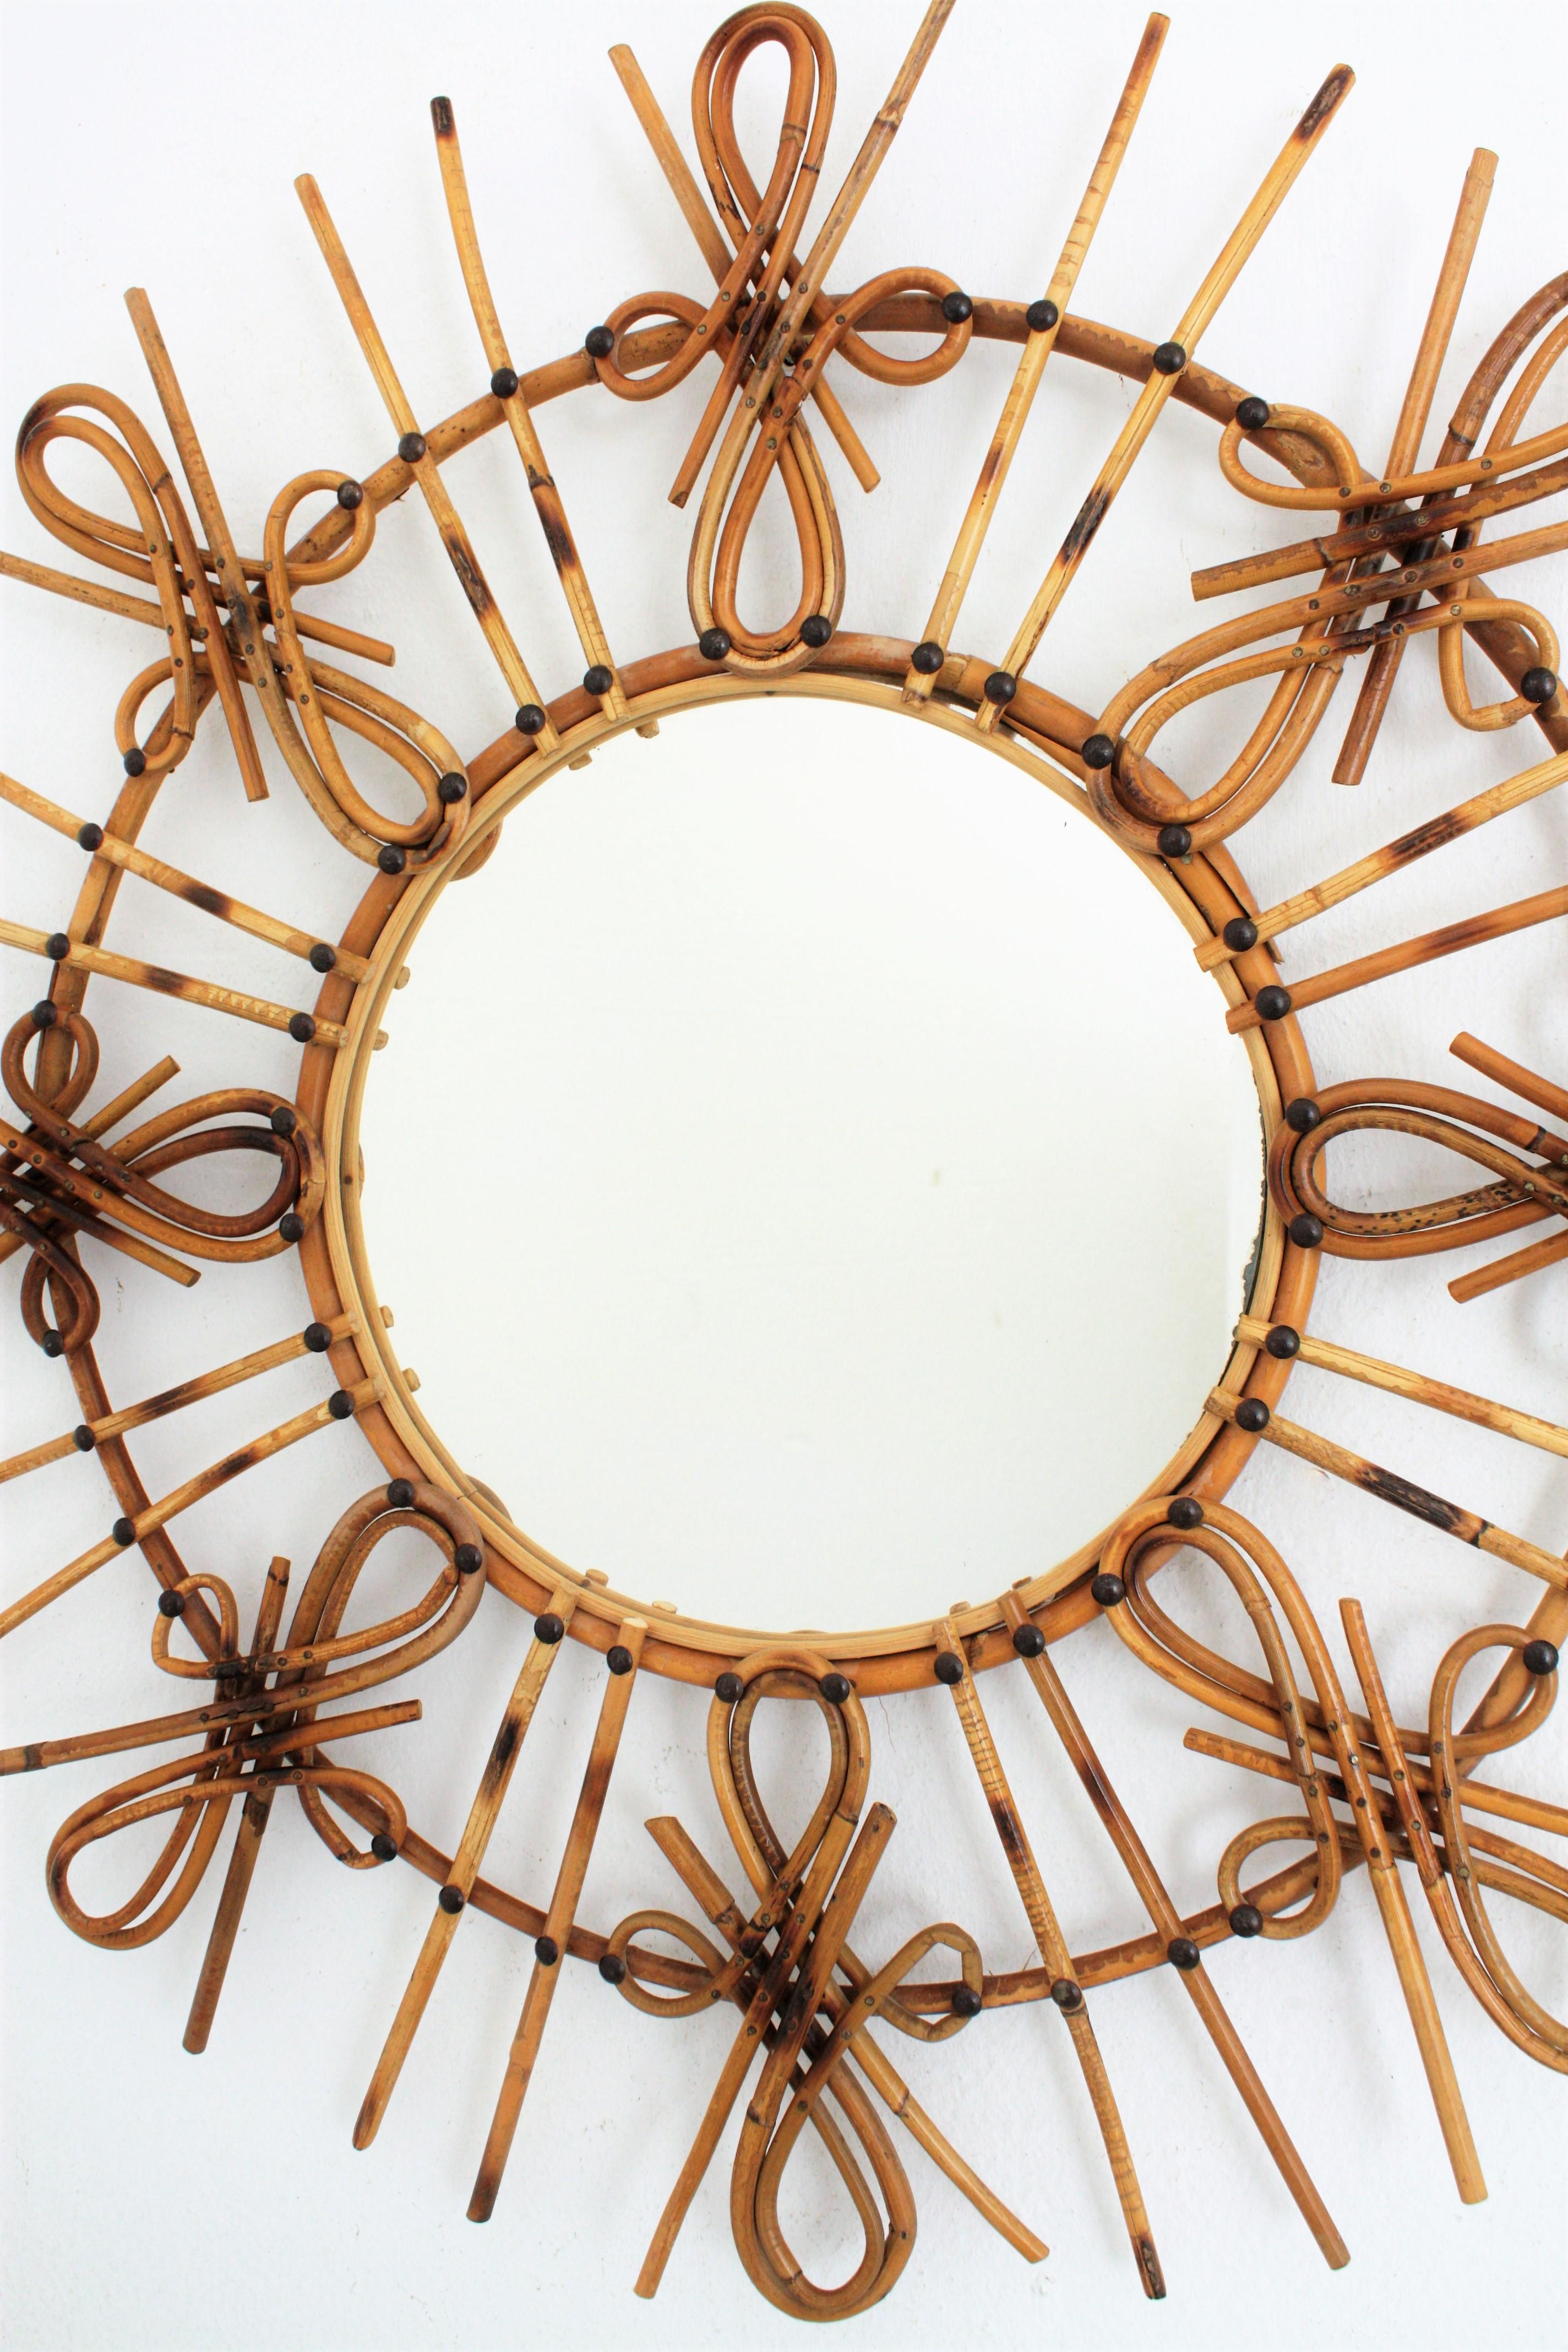 Wicker Rattan Sunburst Mirror with Chinoiserie Tiki Accents, Spain, 1950s For Sale